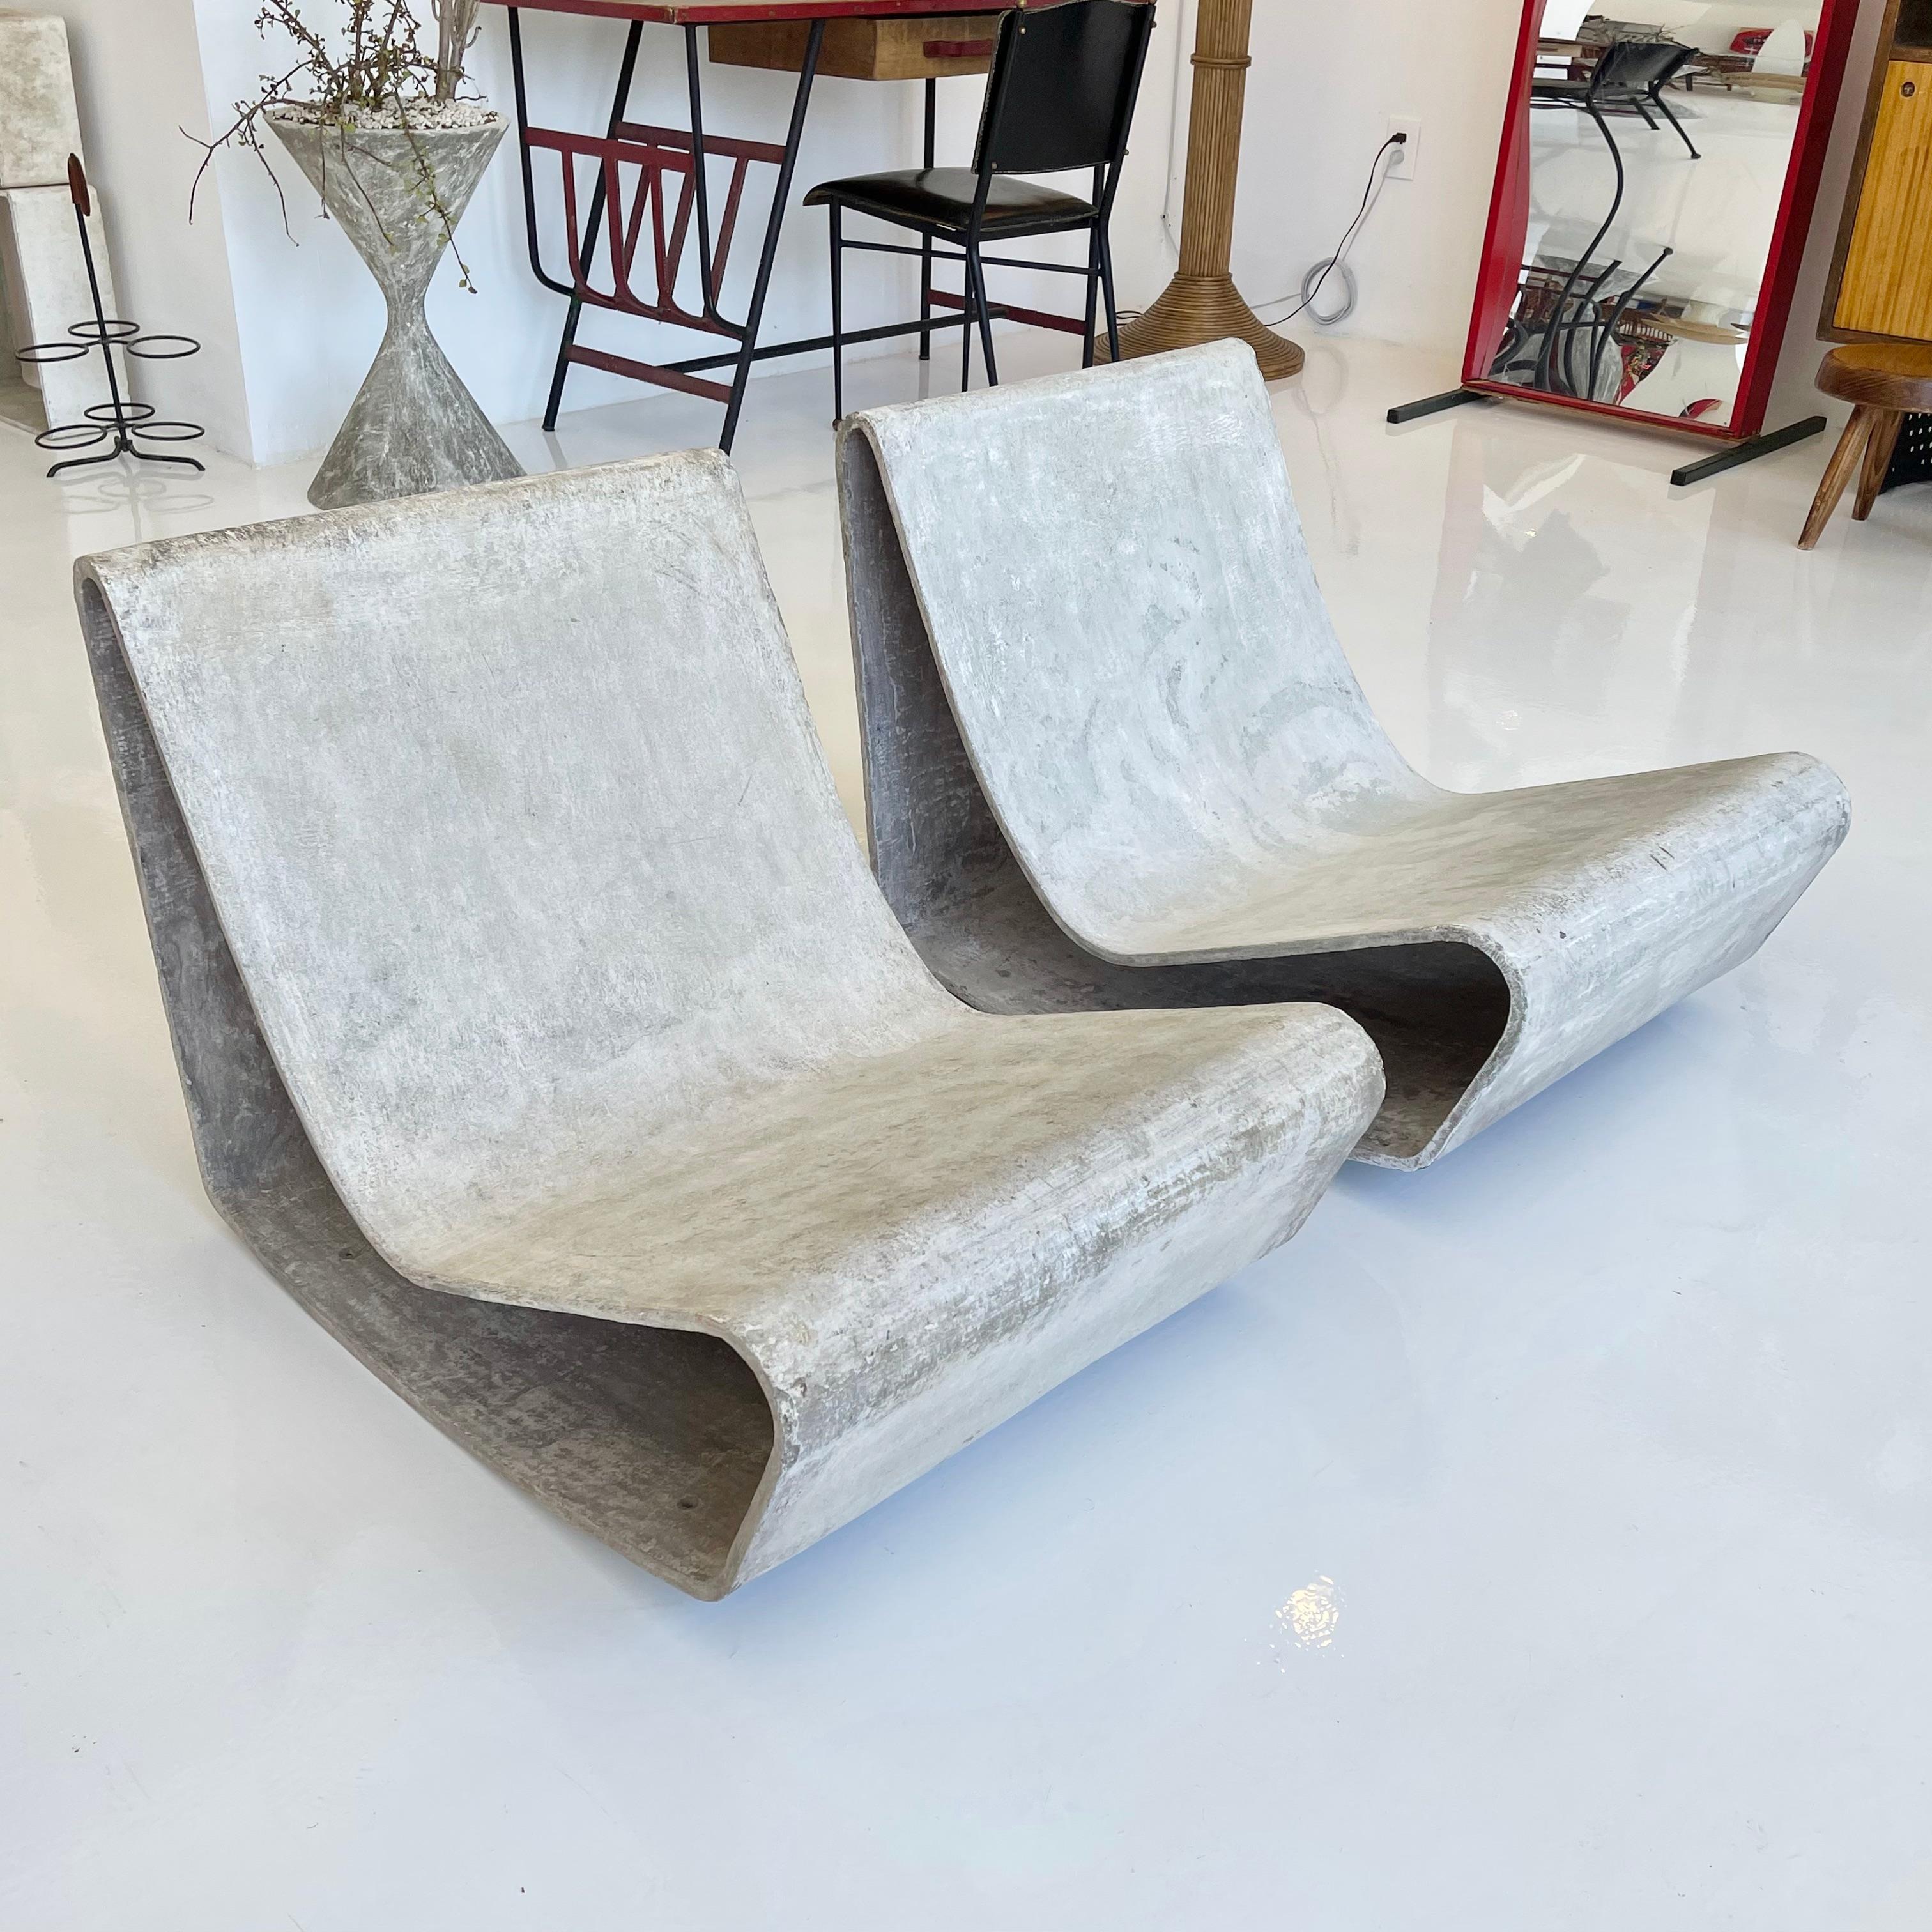 Fantastic set of vintage concrete loop chairs by Swiss designer Willy Guhl for Eternit. One of the most iconic chairs ever designed. No cracks. Great condition and patina.

Priced as a pair. 

4 pairs available. 





